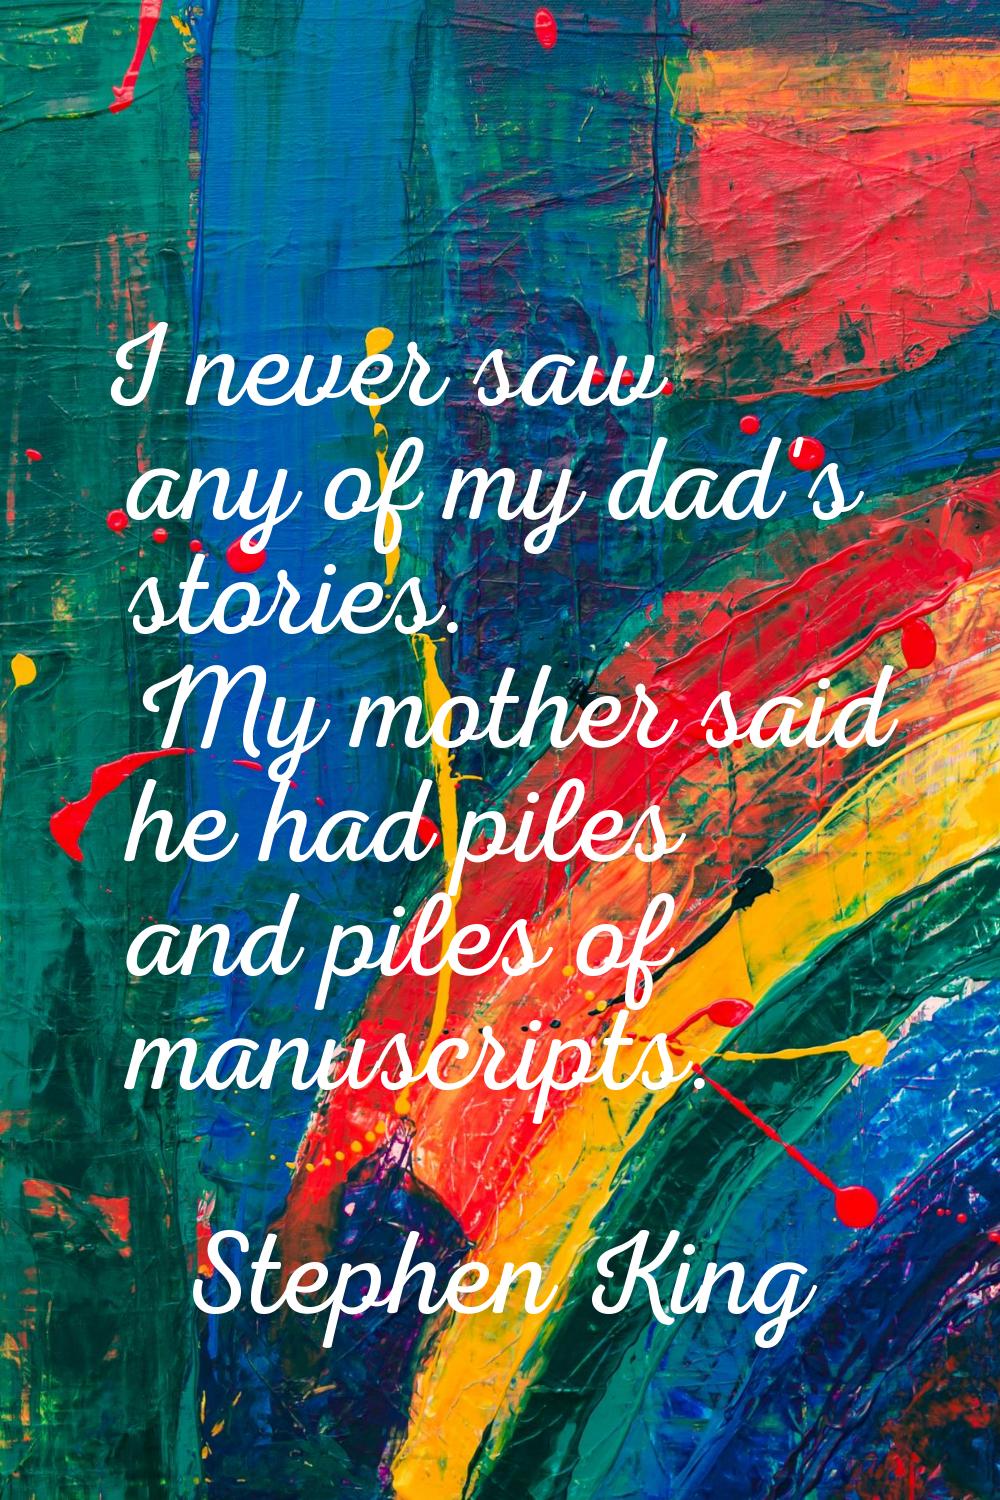 I never saw any of my dad's stories. My mother said he had piles and piles of manuscripts.